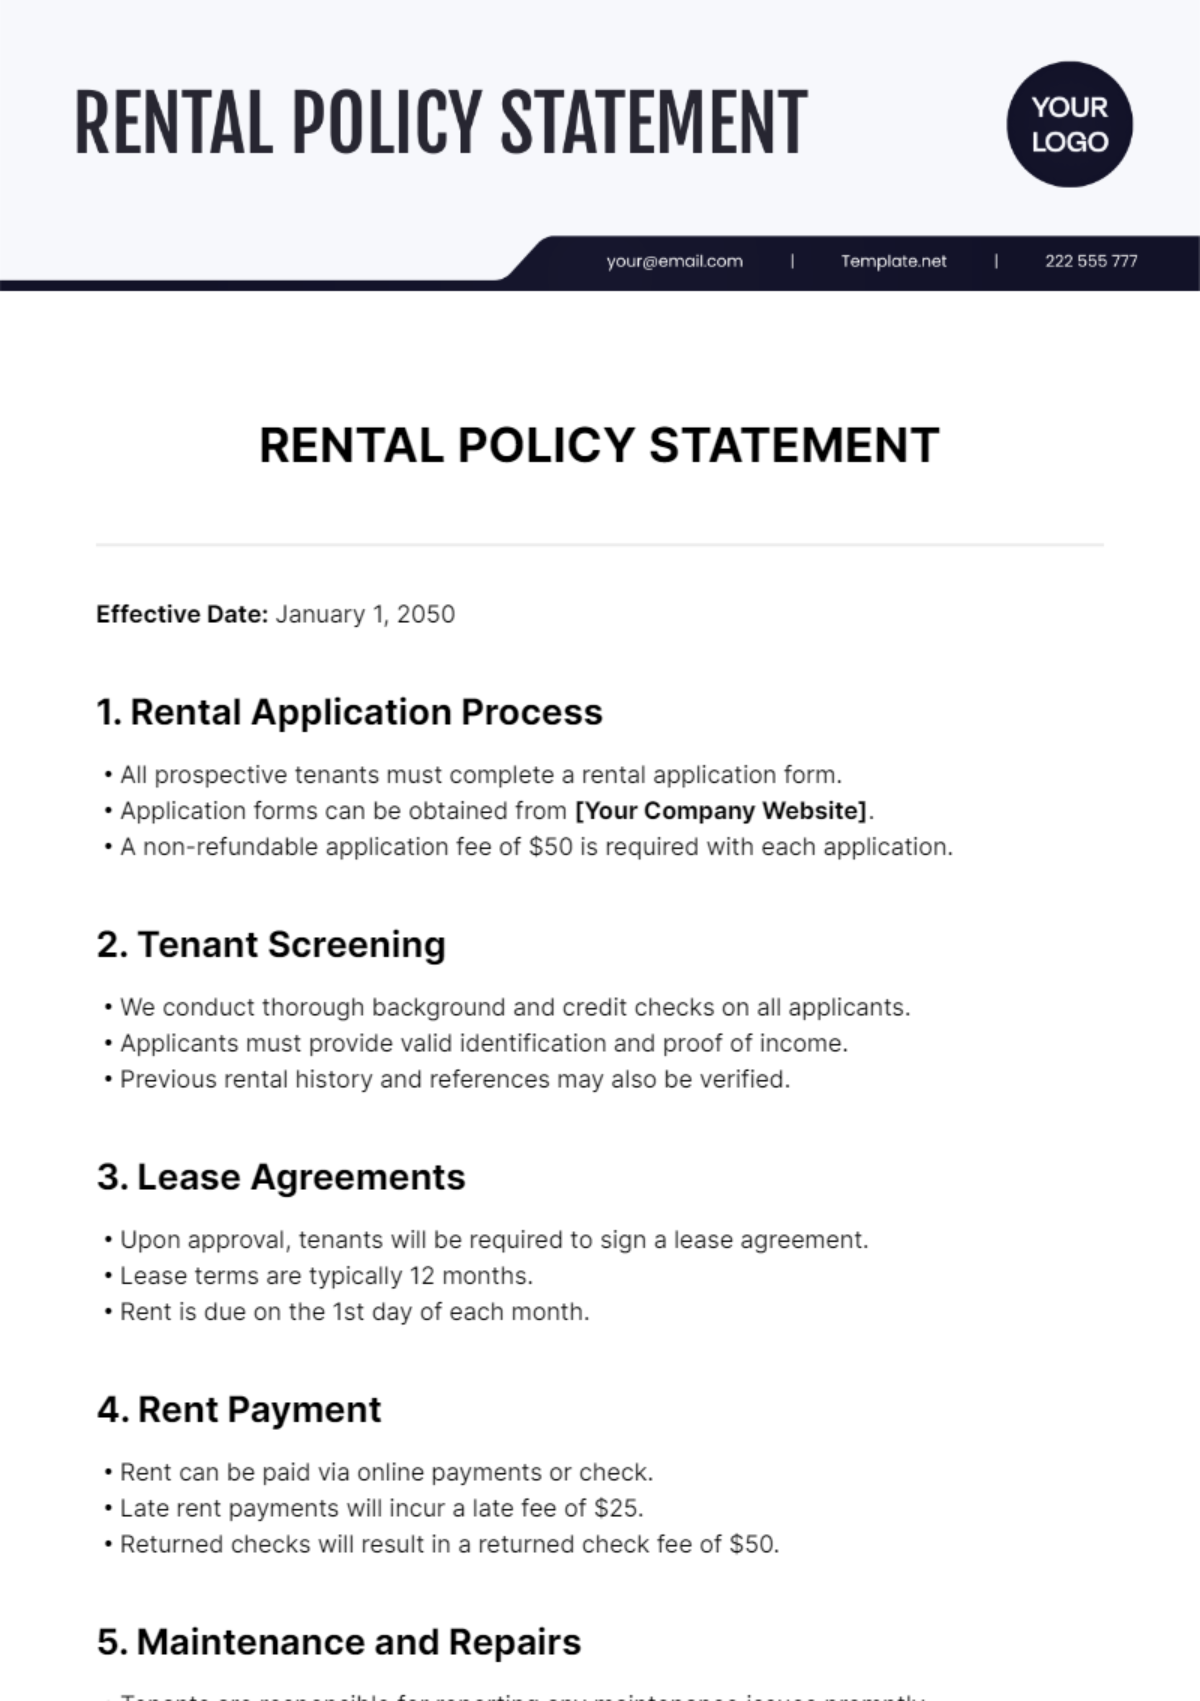 Rental Policy Statement Template